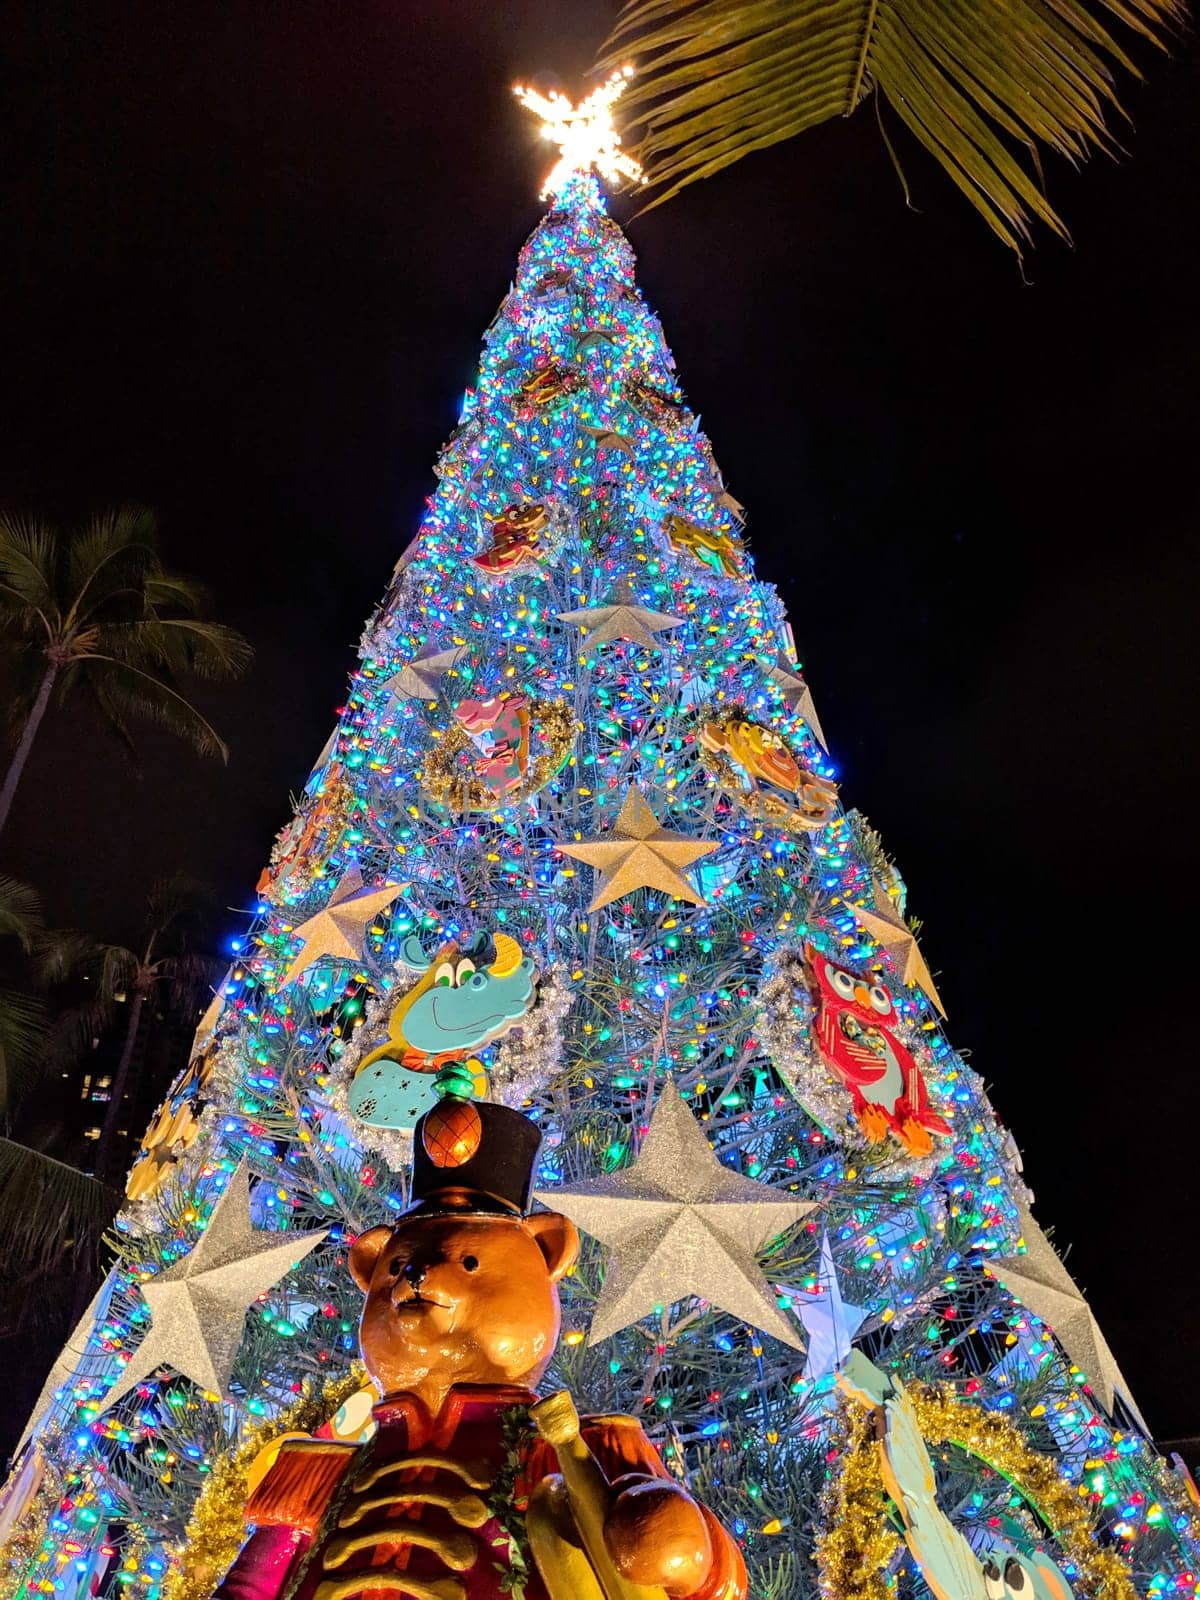 Honolulu - December 24, 2018: Tall and festive Christmas tree at Honolulu Hale, the city hall of Honolulu, Hawaii. The tree is adorned with colorful ornaments, lights, and a star on top. The photo is taken at night, with the tree glowing against a dark sky. The background shows palm trees and buildings, creating a contrast between the tropical and urban elements of the city. The photo is a unique and beautiful representation of Christmas in Hawaii.